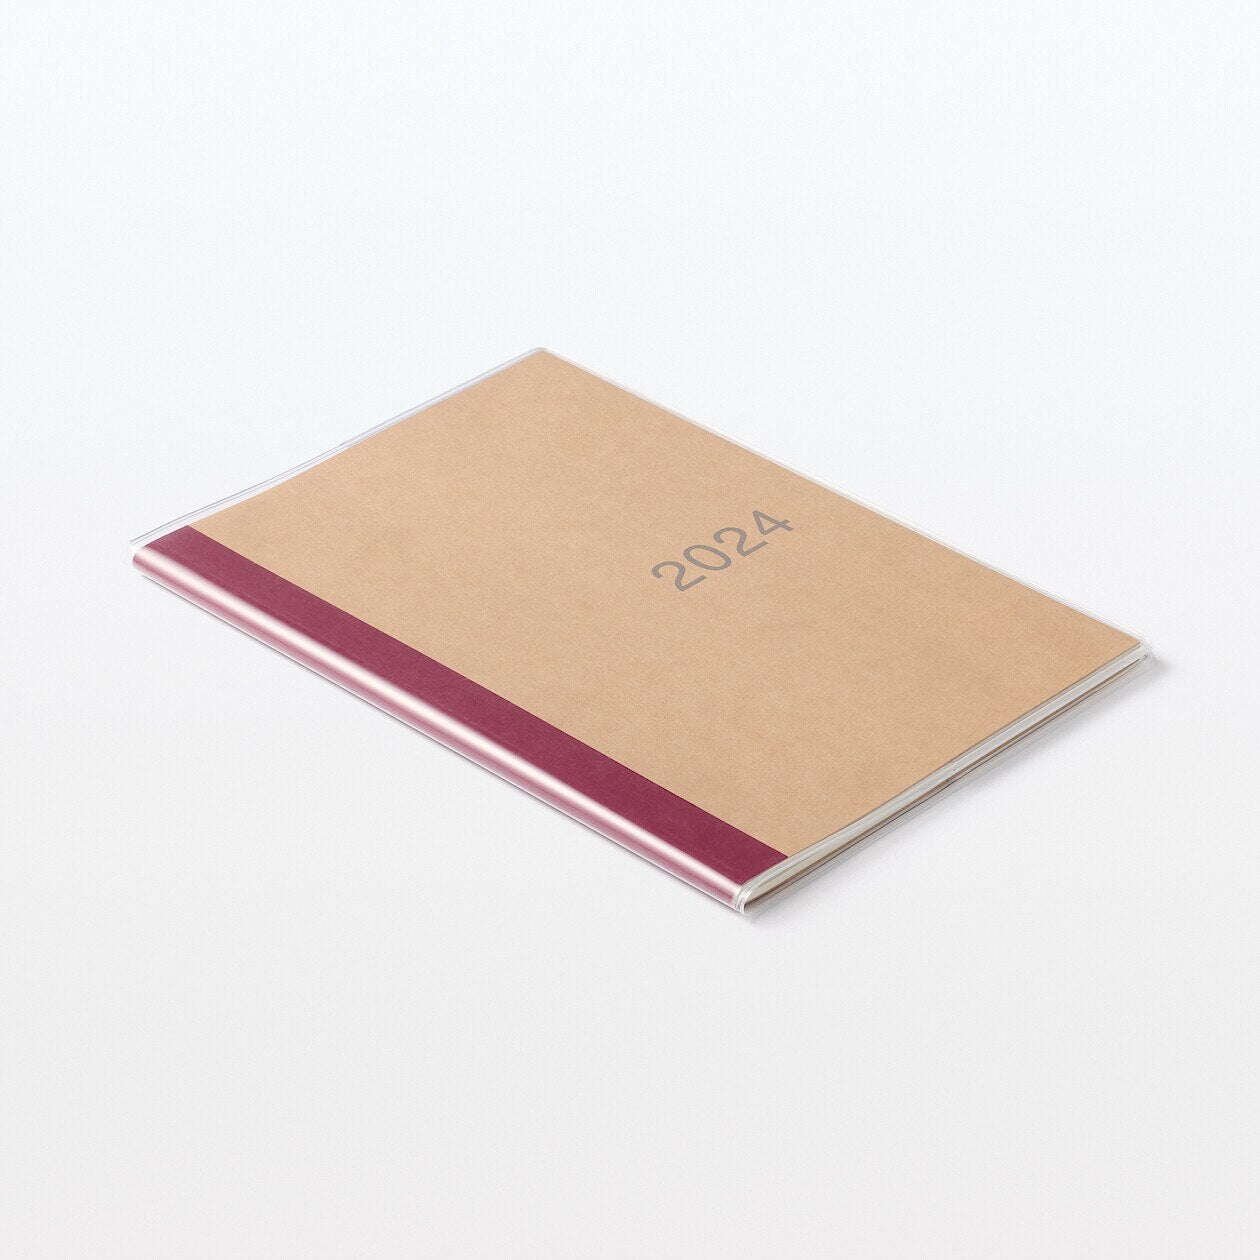 50% off Diaries, Planners & Calendars